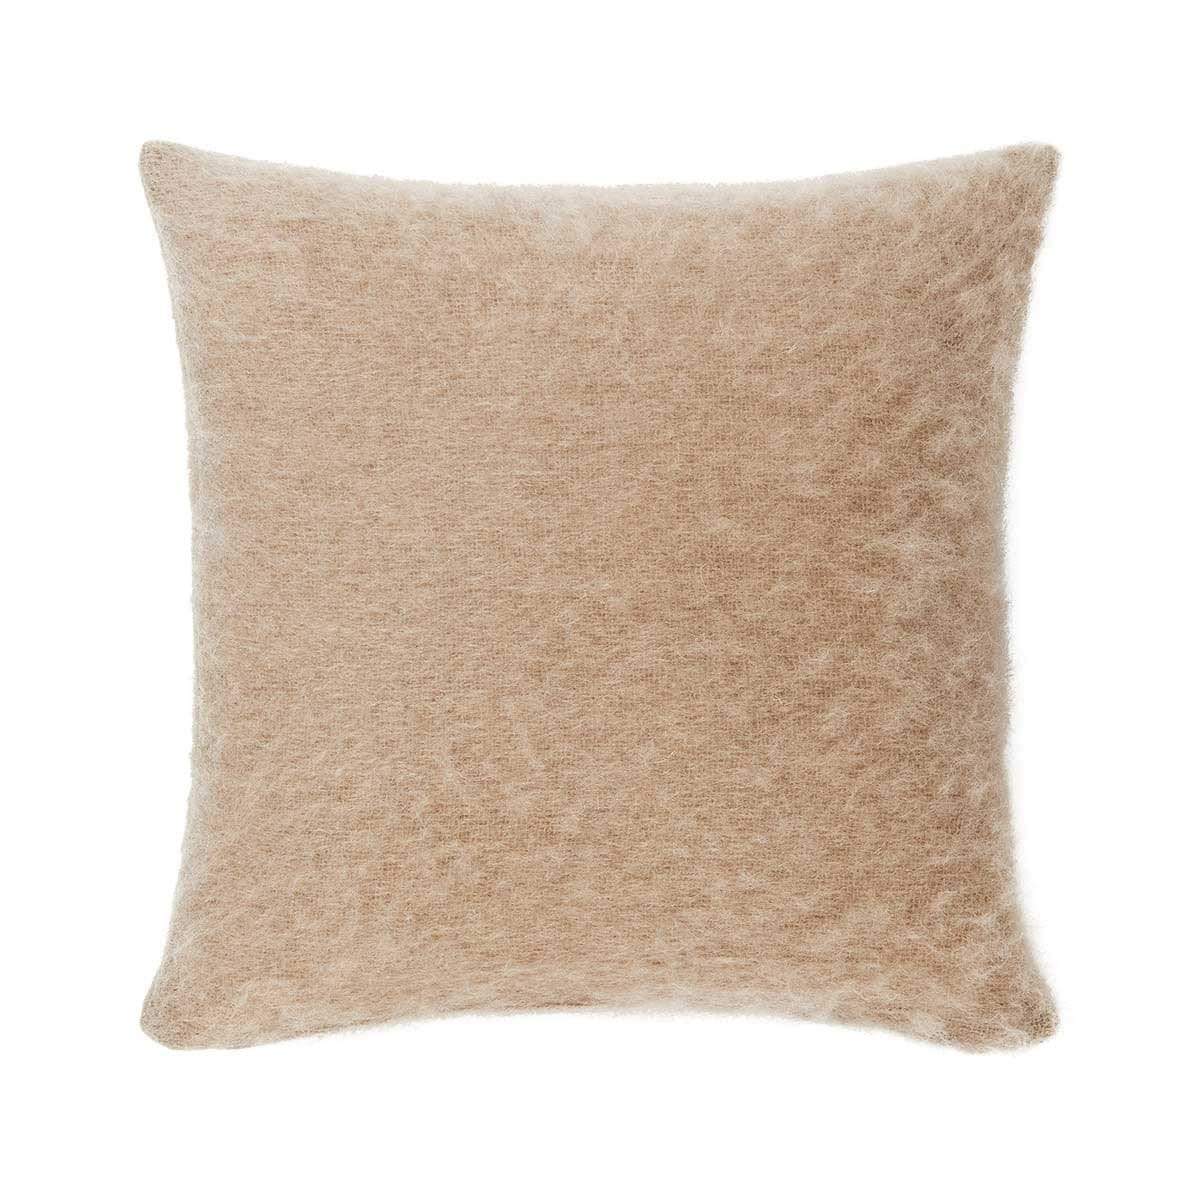 Decorative Pillows Mohair Decorative Pillow by Yves Delorme 18 x 18 in / Noisette Yves Delorme